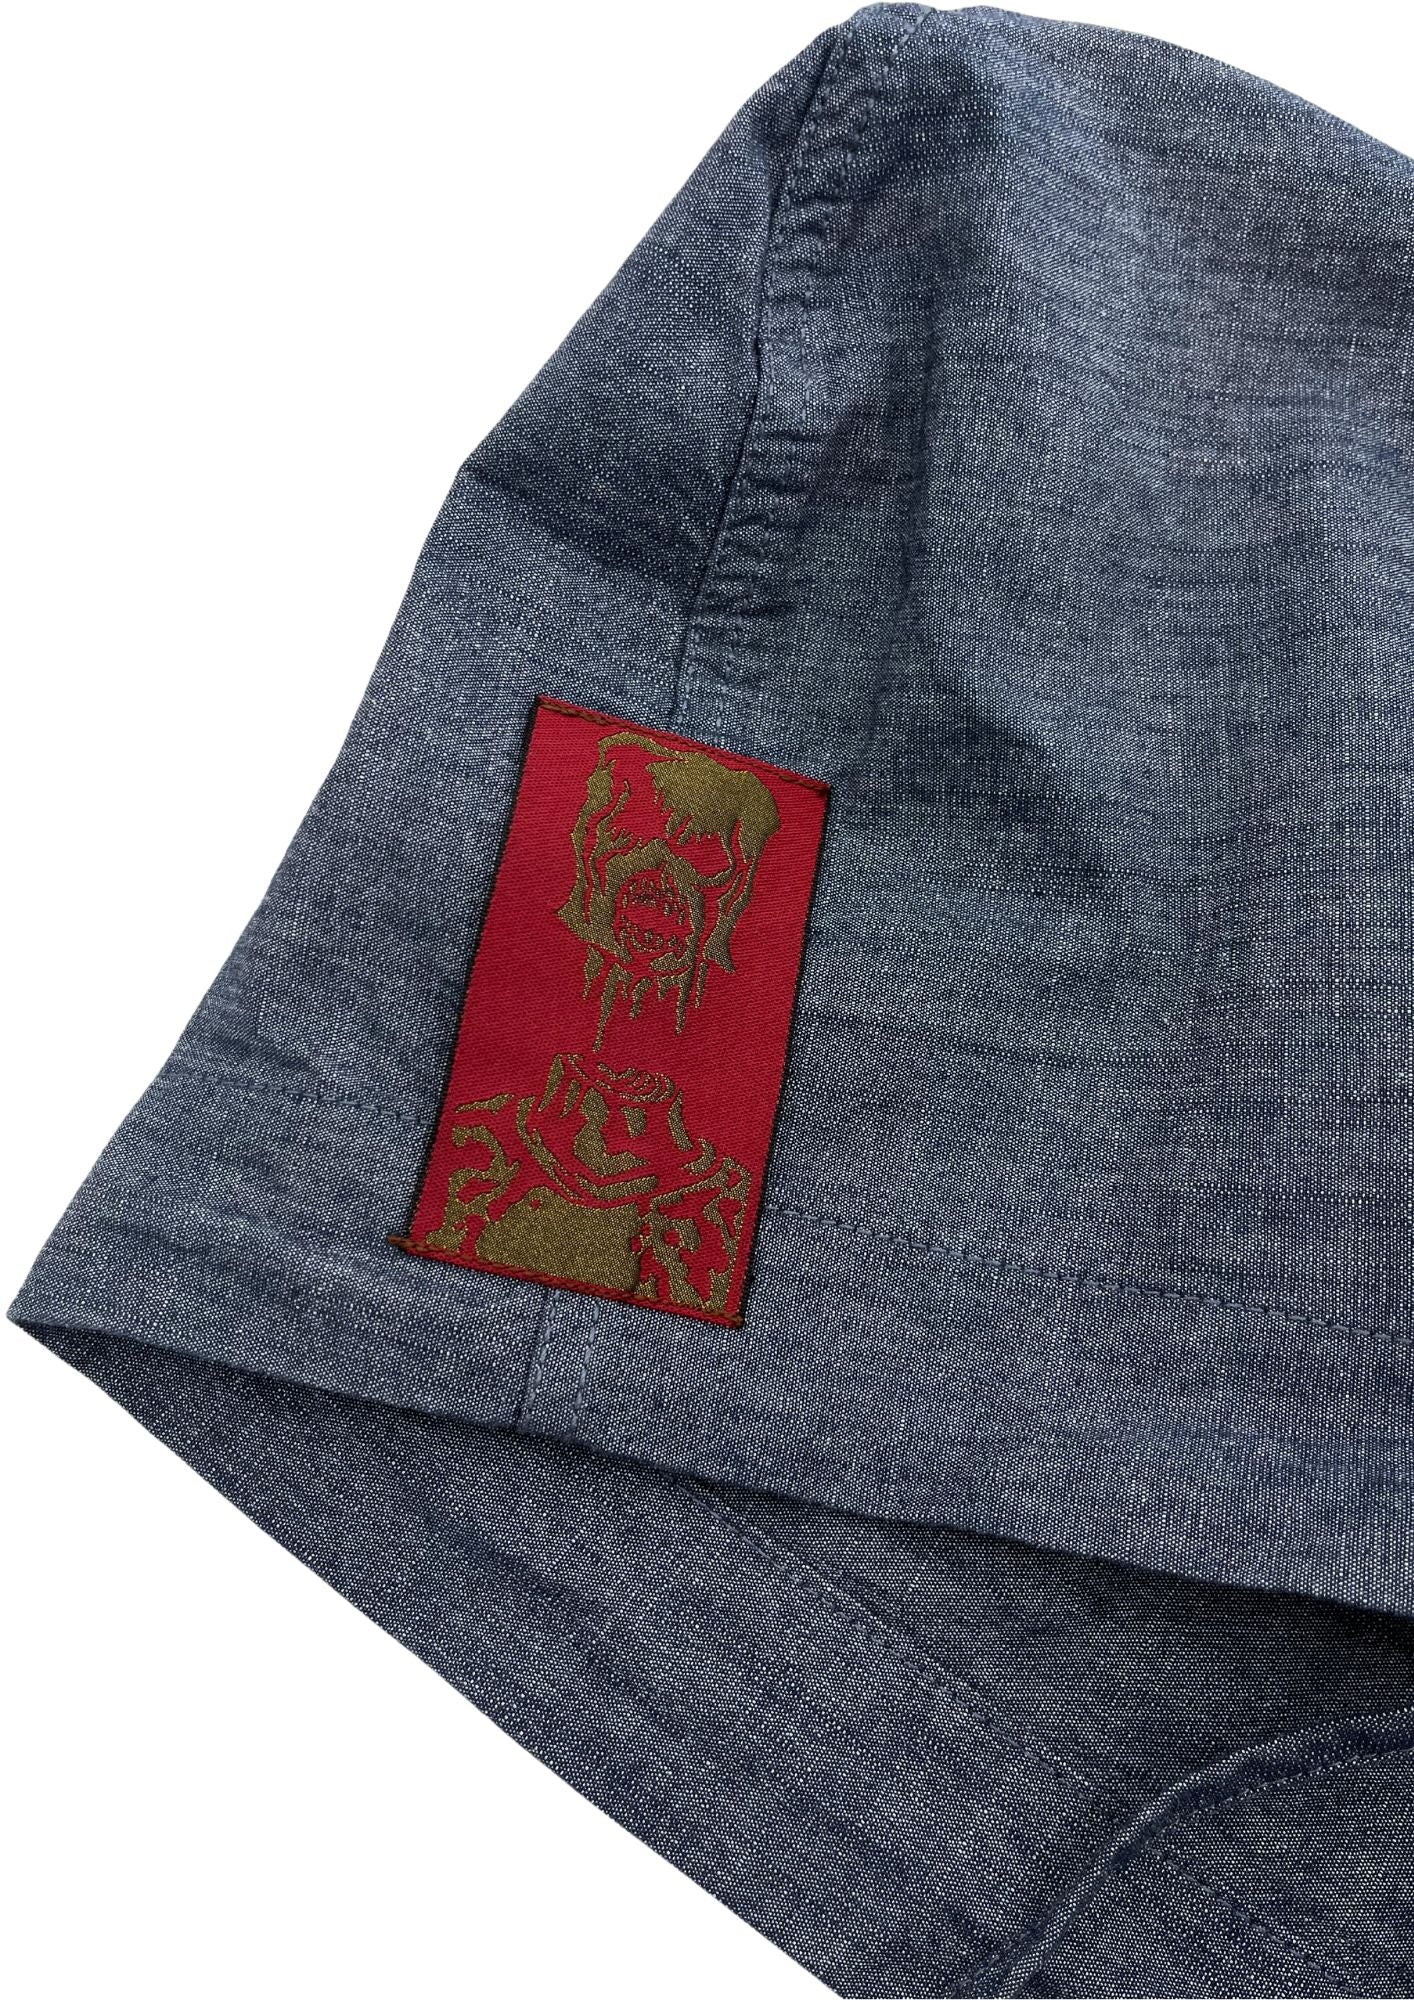 Dorohedoro x MHz Shin and Noi L / S Button Up Hoodie Shirts